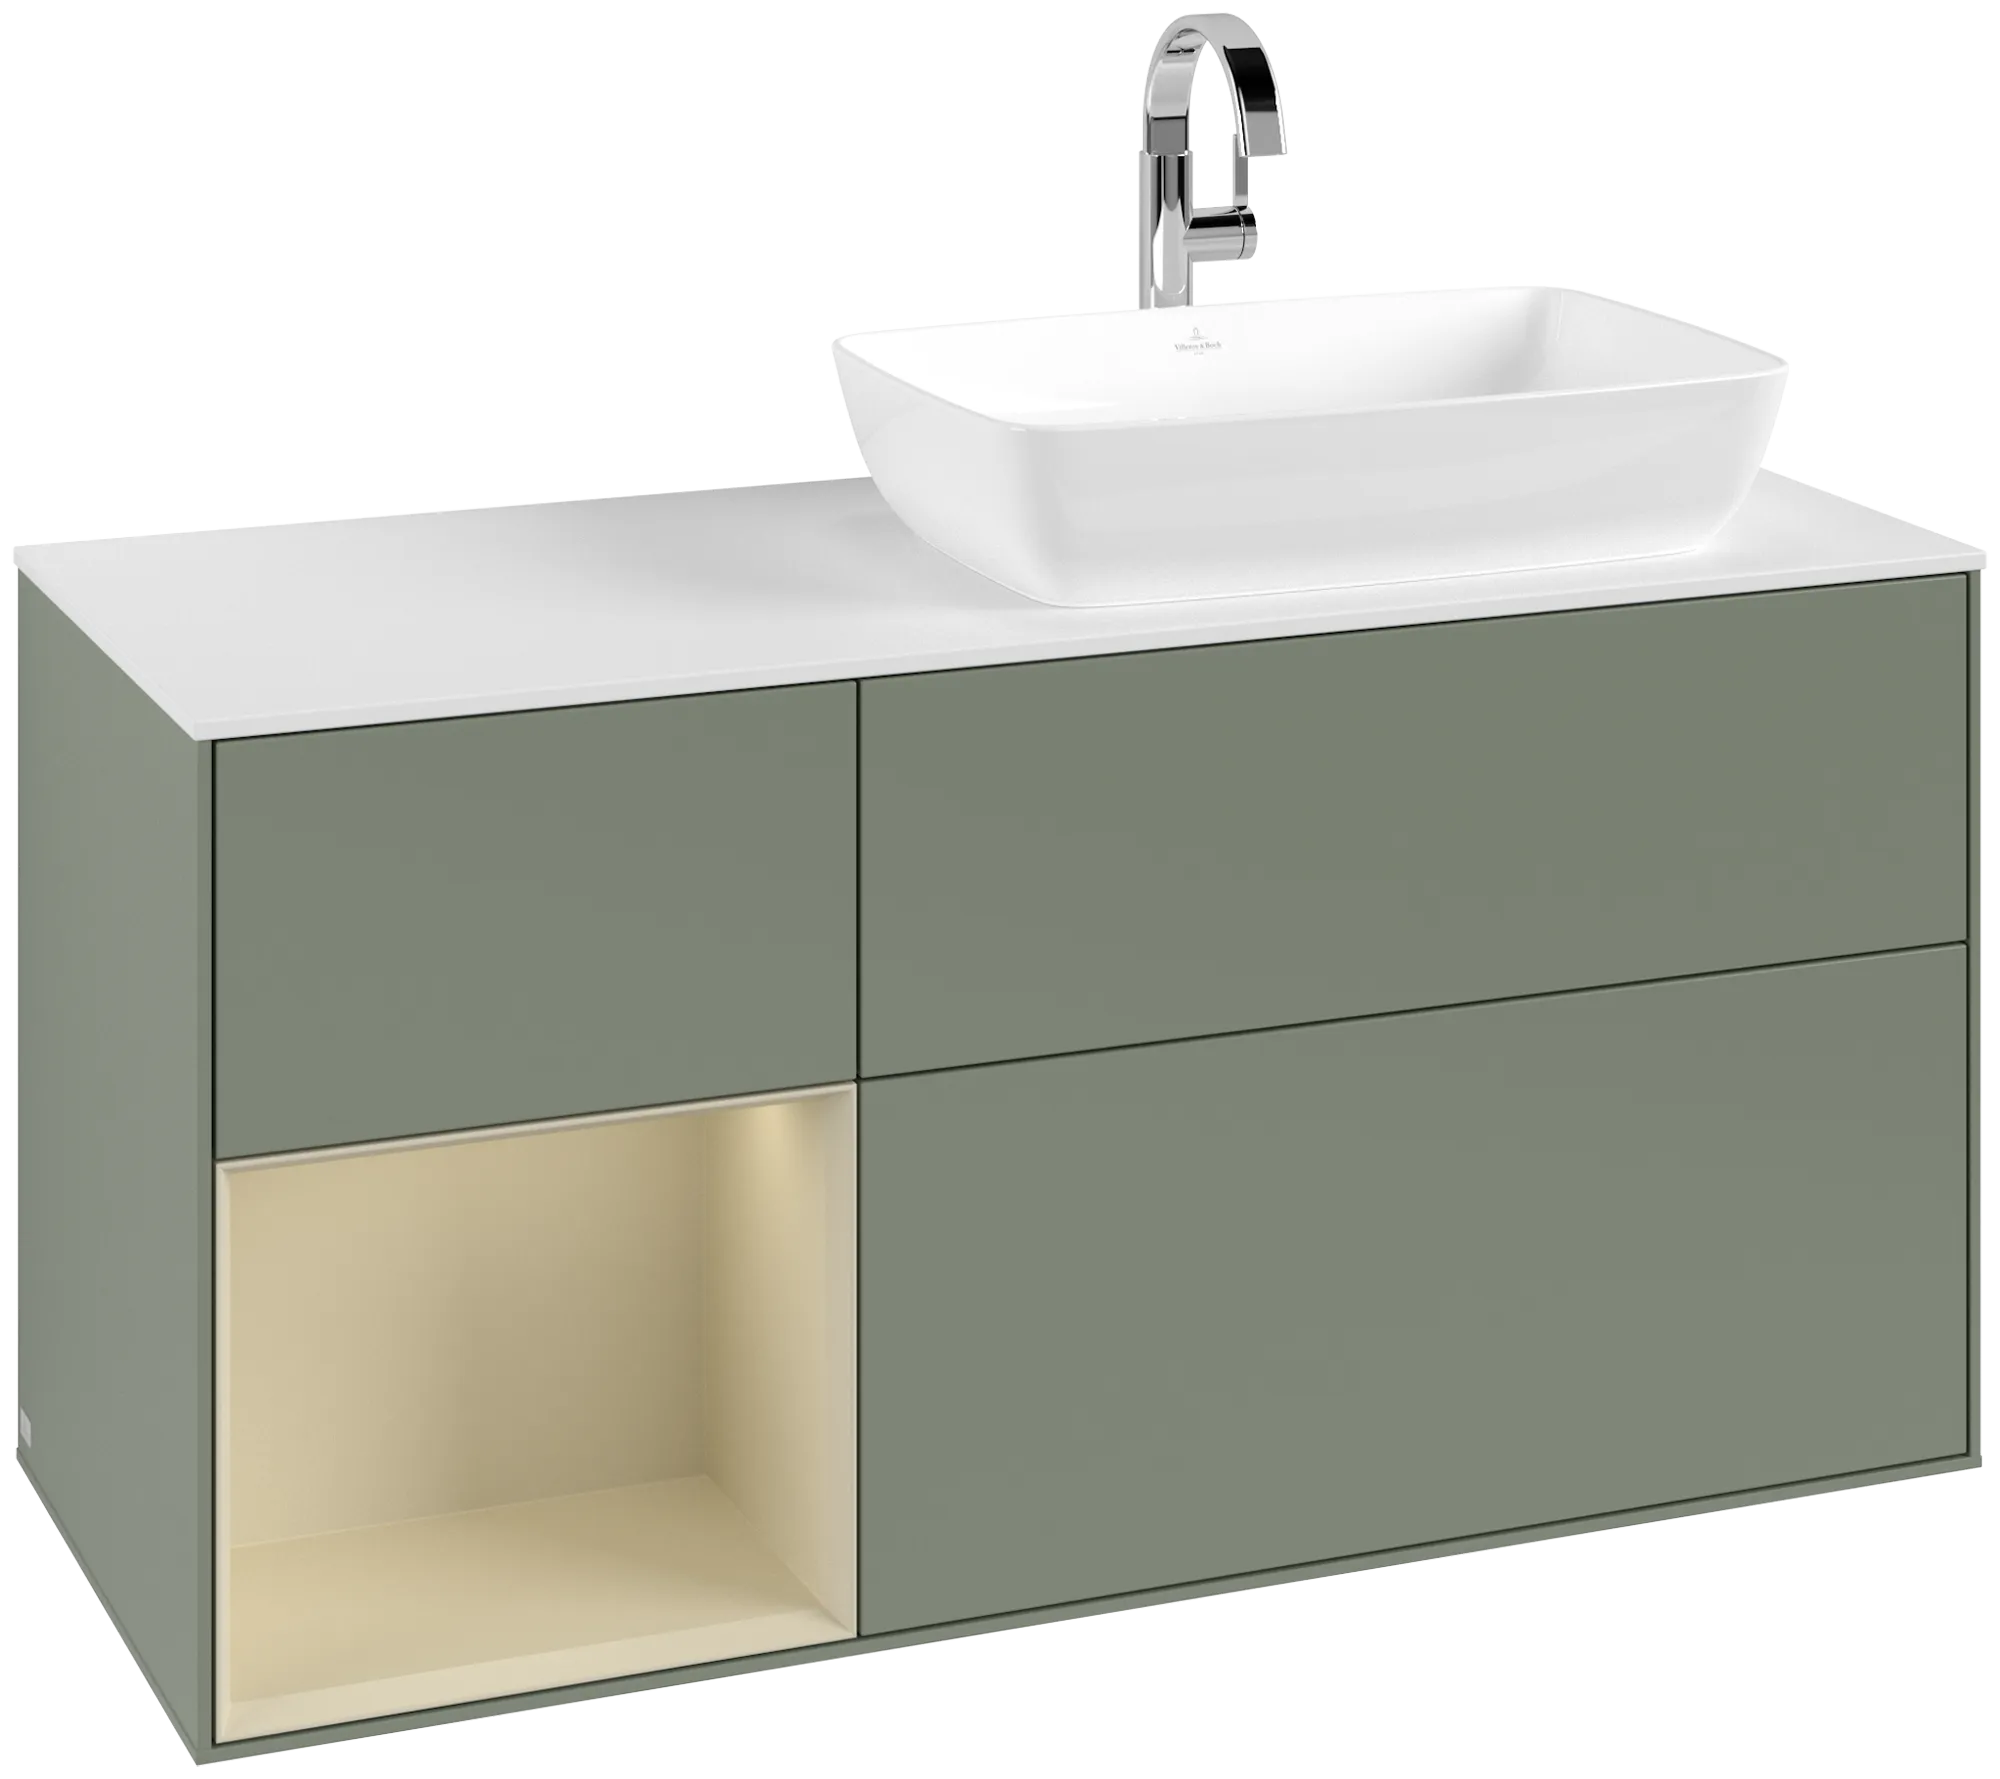 Picture of VILLEROY BOCH Finion Vanity unit, with lighting, 3 pull-out compartments, 1200 x 603 x 501 mm, Olive Matt Lacquer / Silk Grey Matt Lacquer / Glass White Matt #G801HJGM